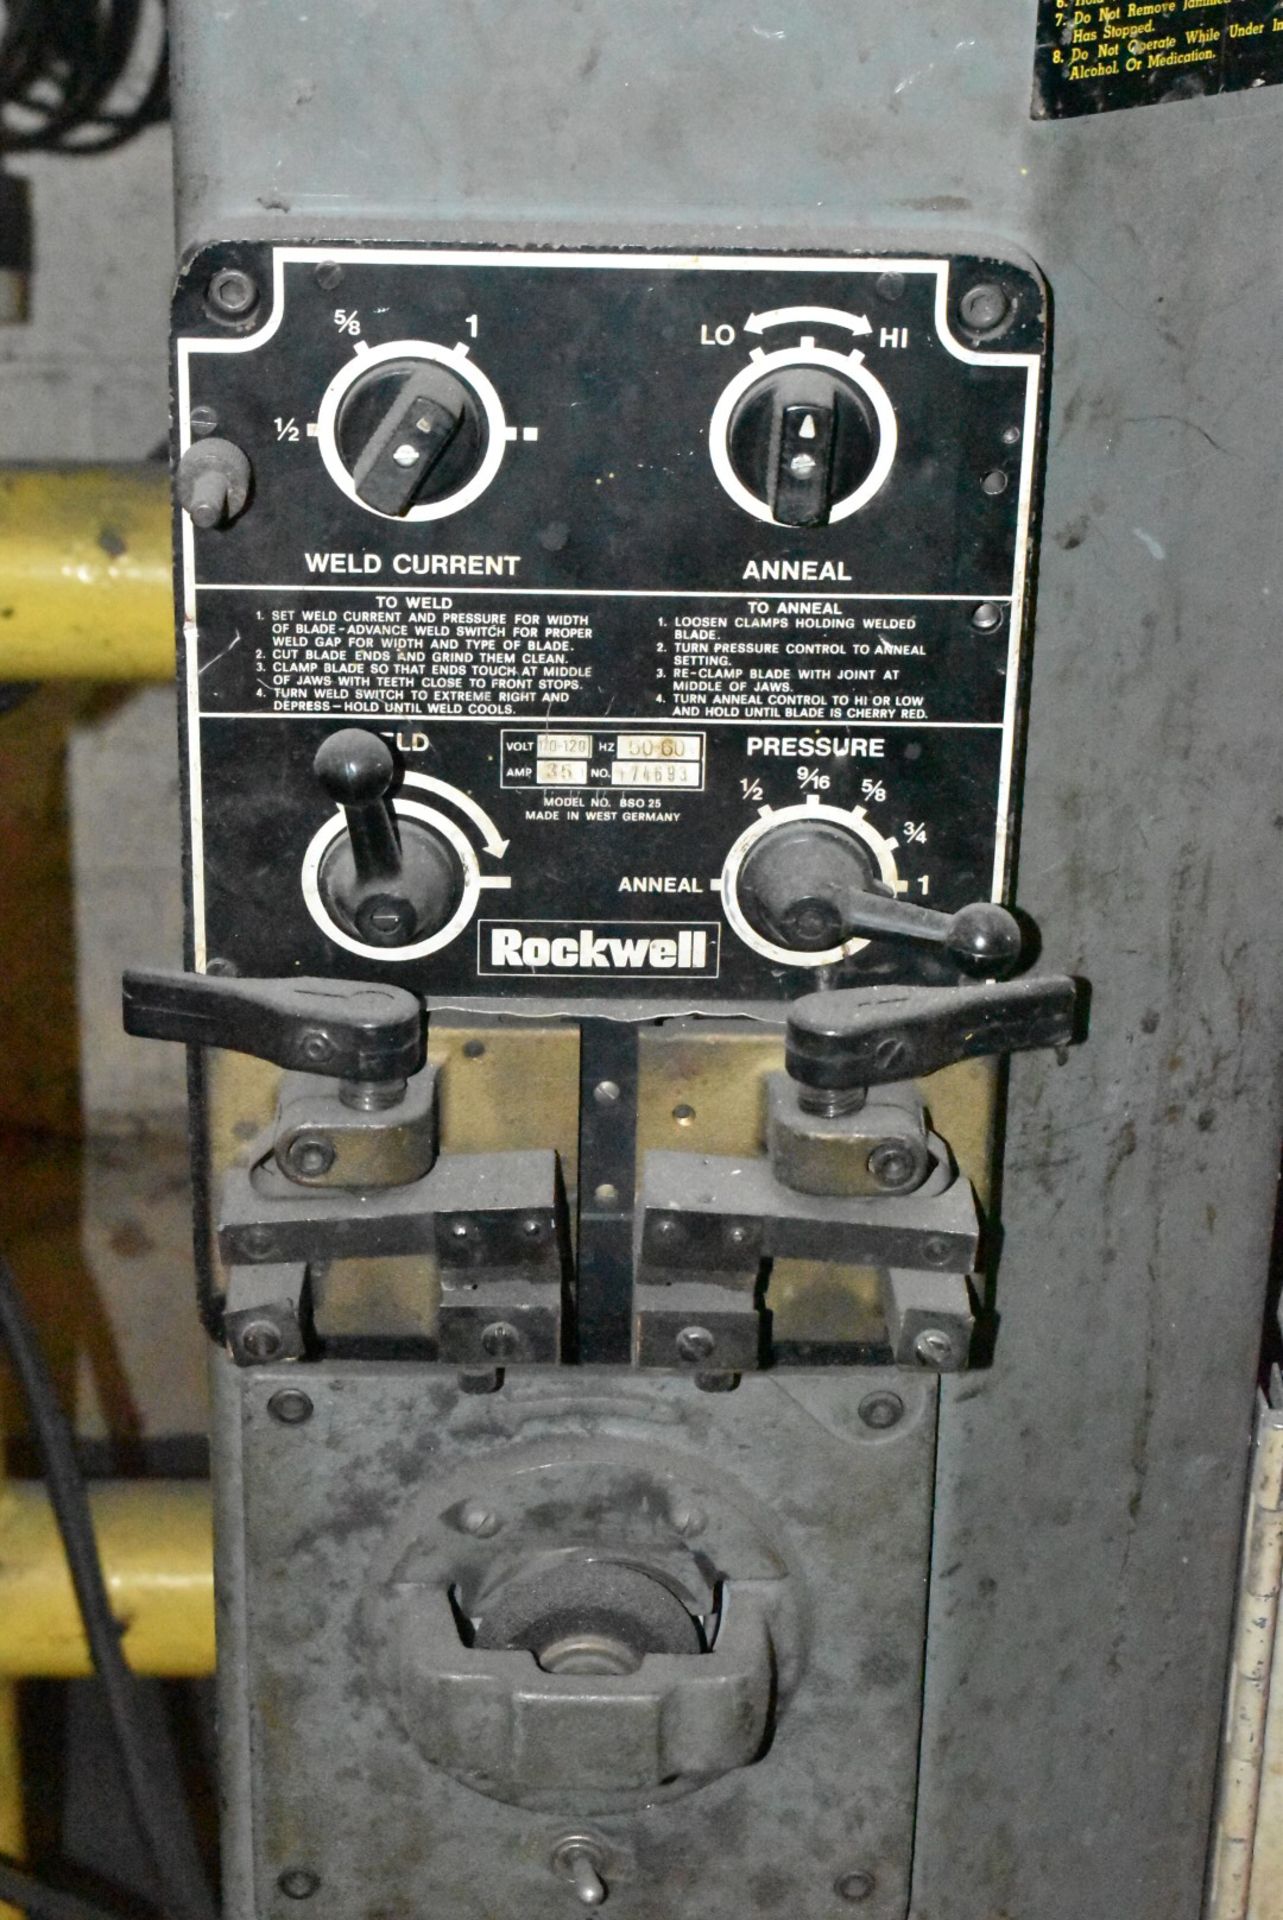 ROCKWELL MODEL 20 VERTICAL BAND SAW WITH 20" THROAT, 12" MAX WORKPIECE HEIGHT, 20"X24.5" MANUAL TILT - Image 4 of 6